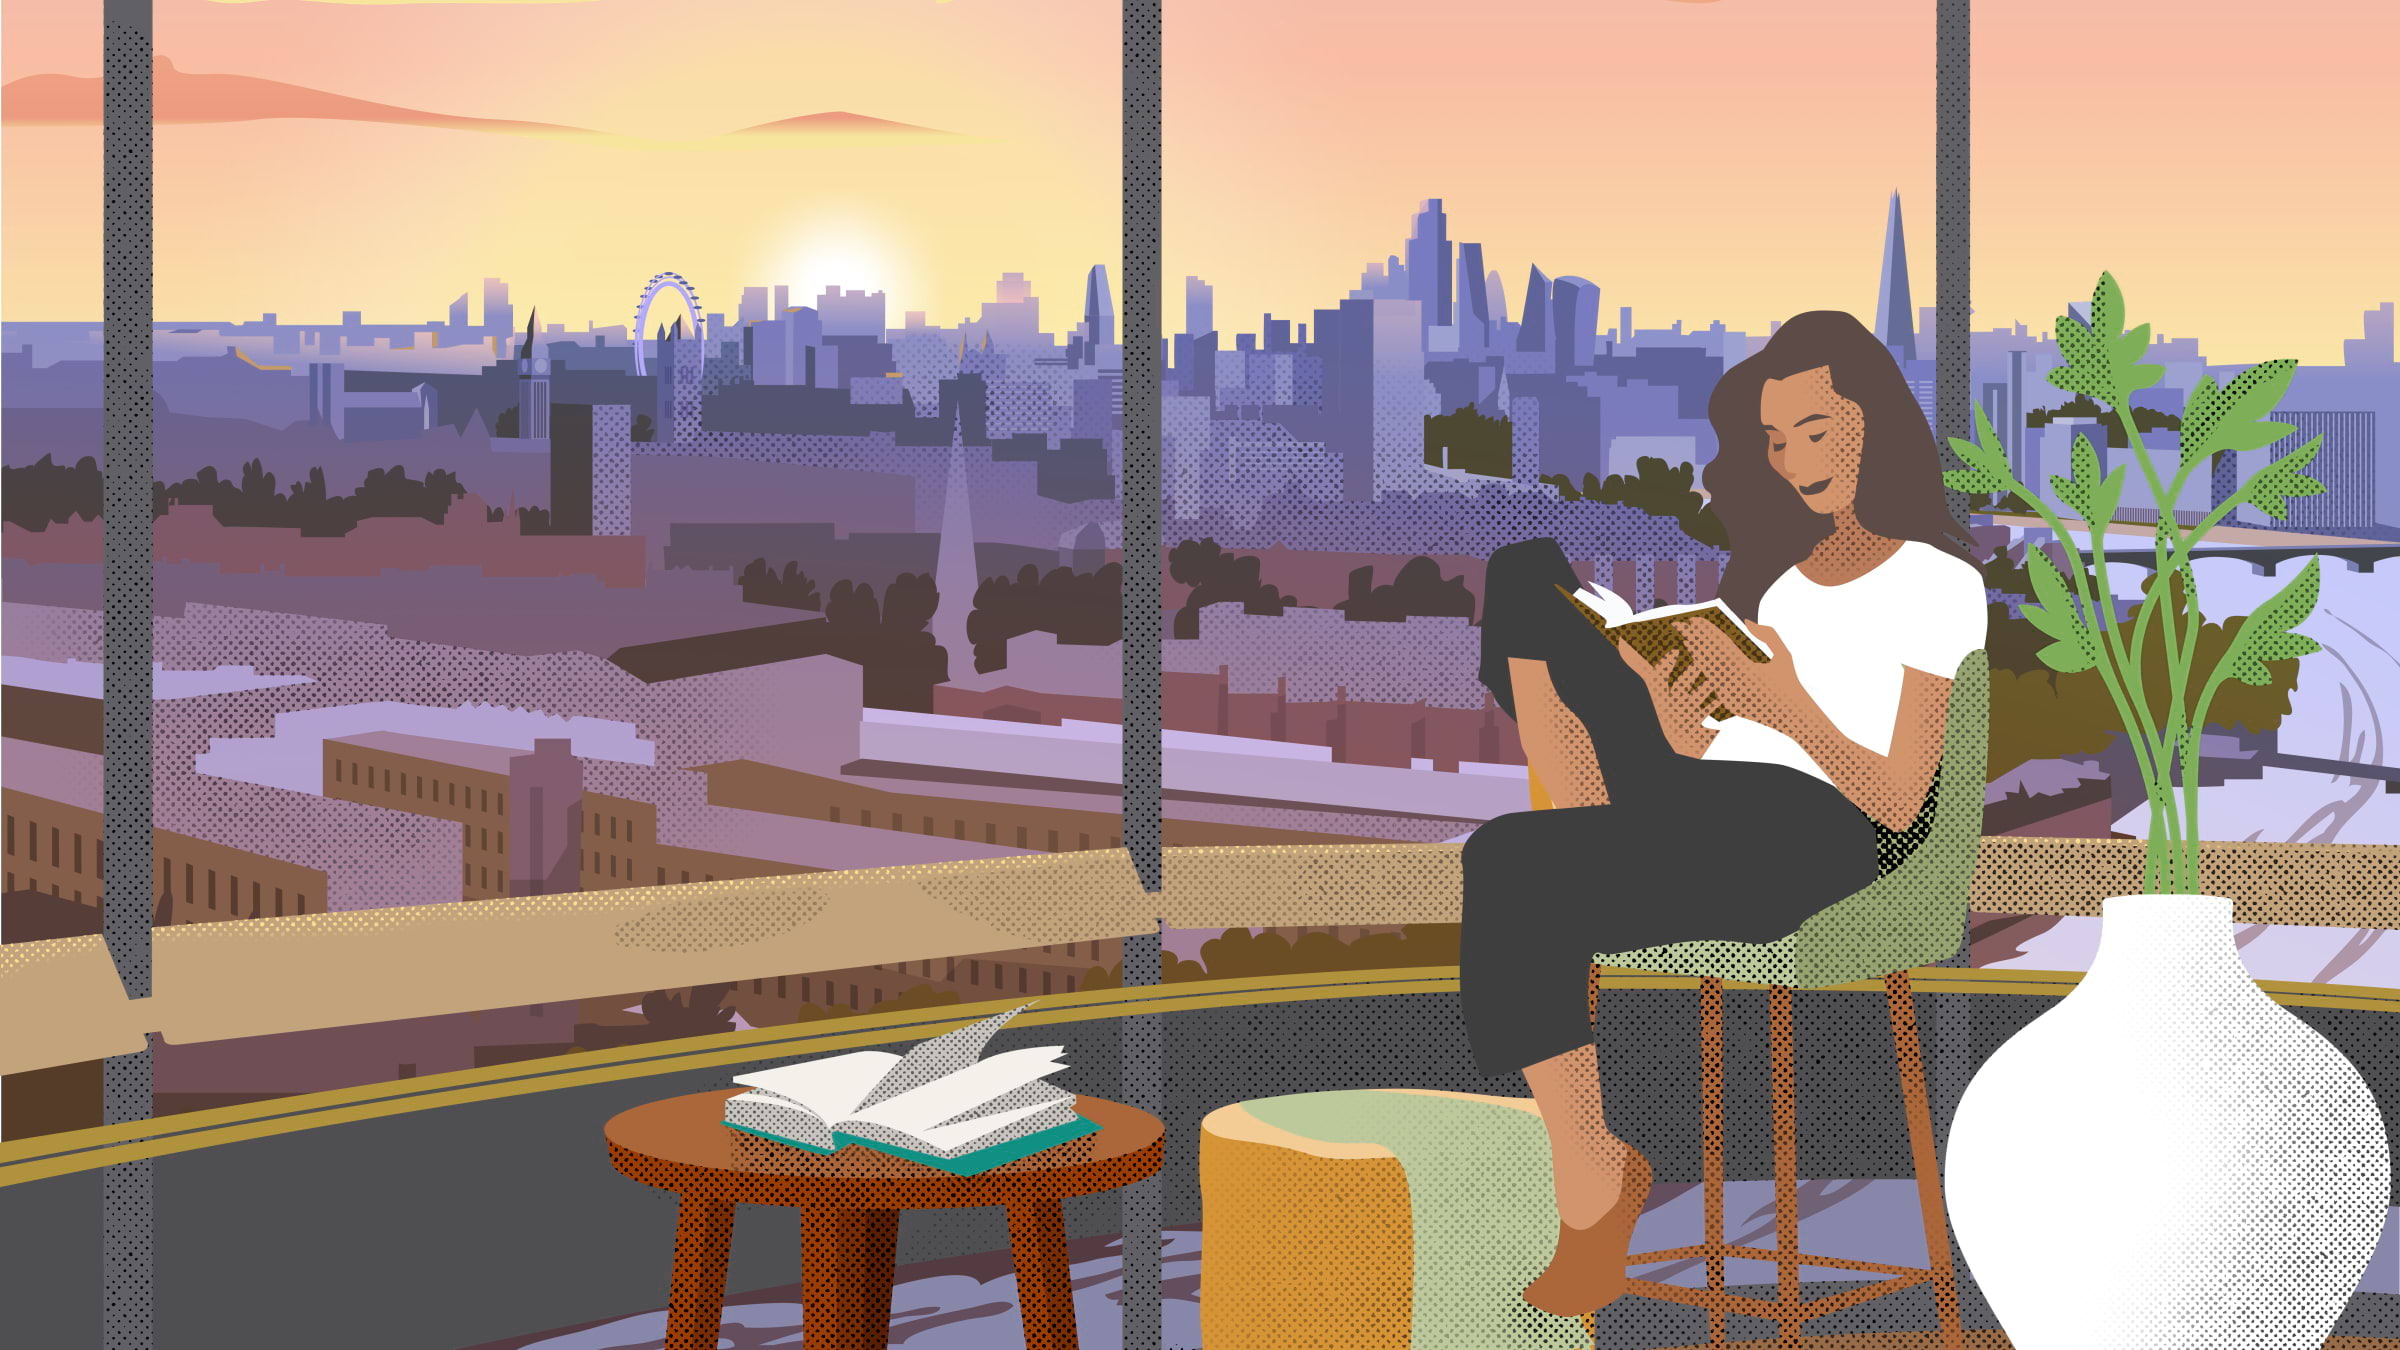 Find your new favourite book above the clouds in Battersea